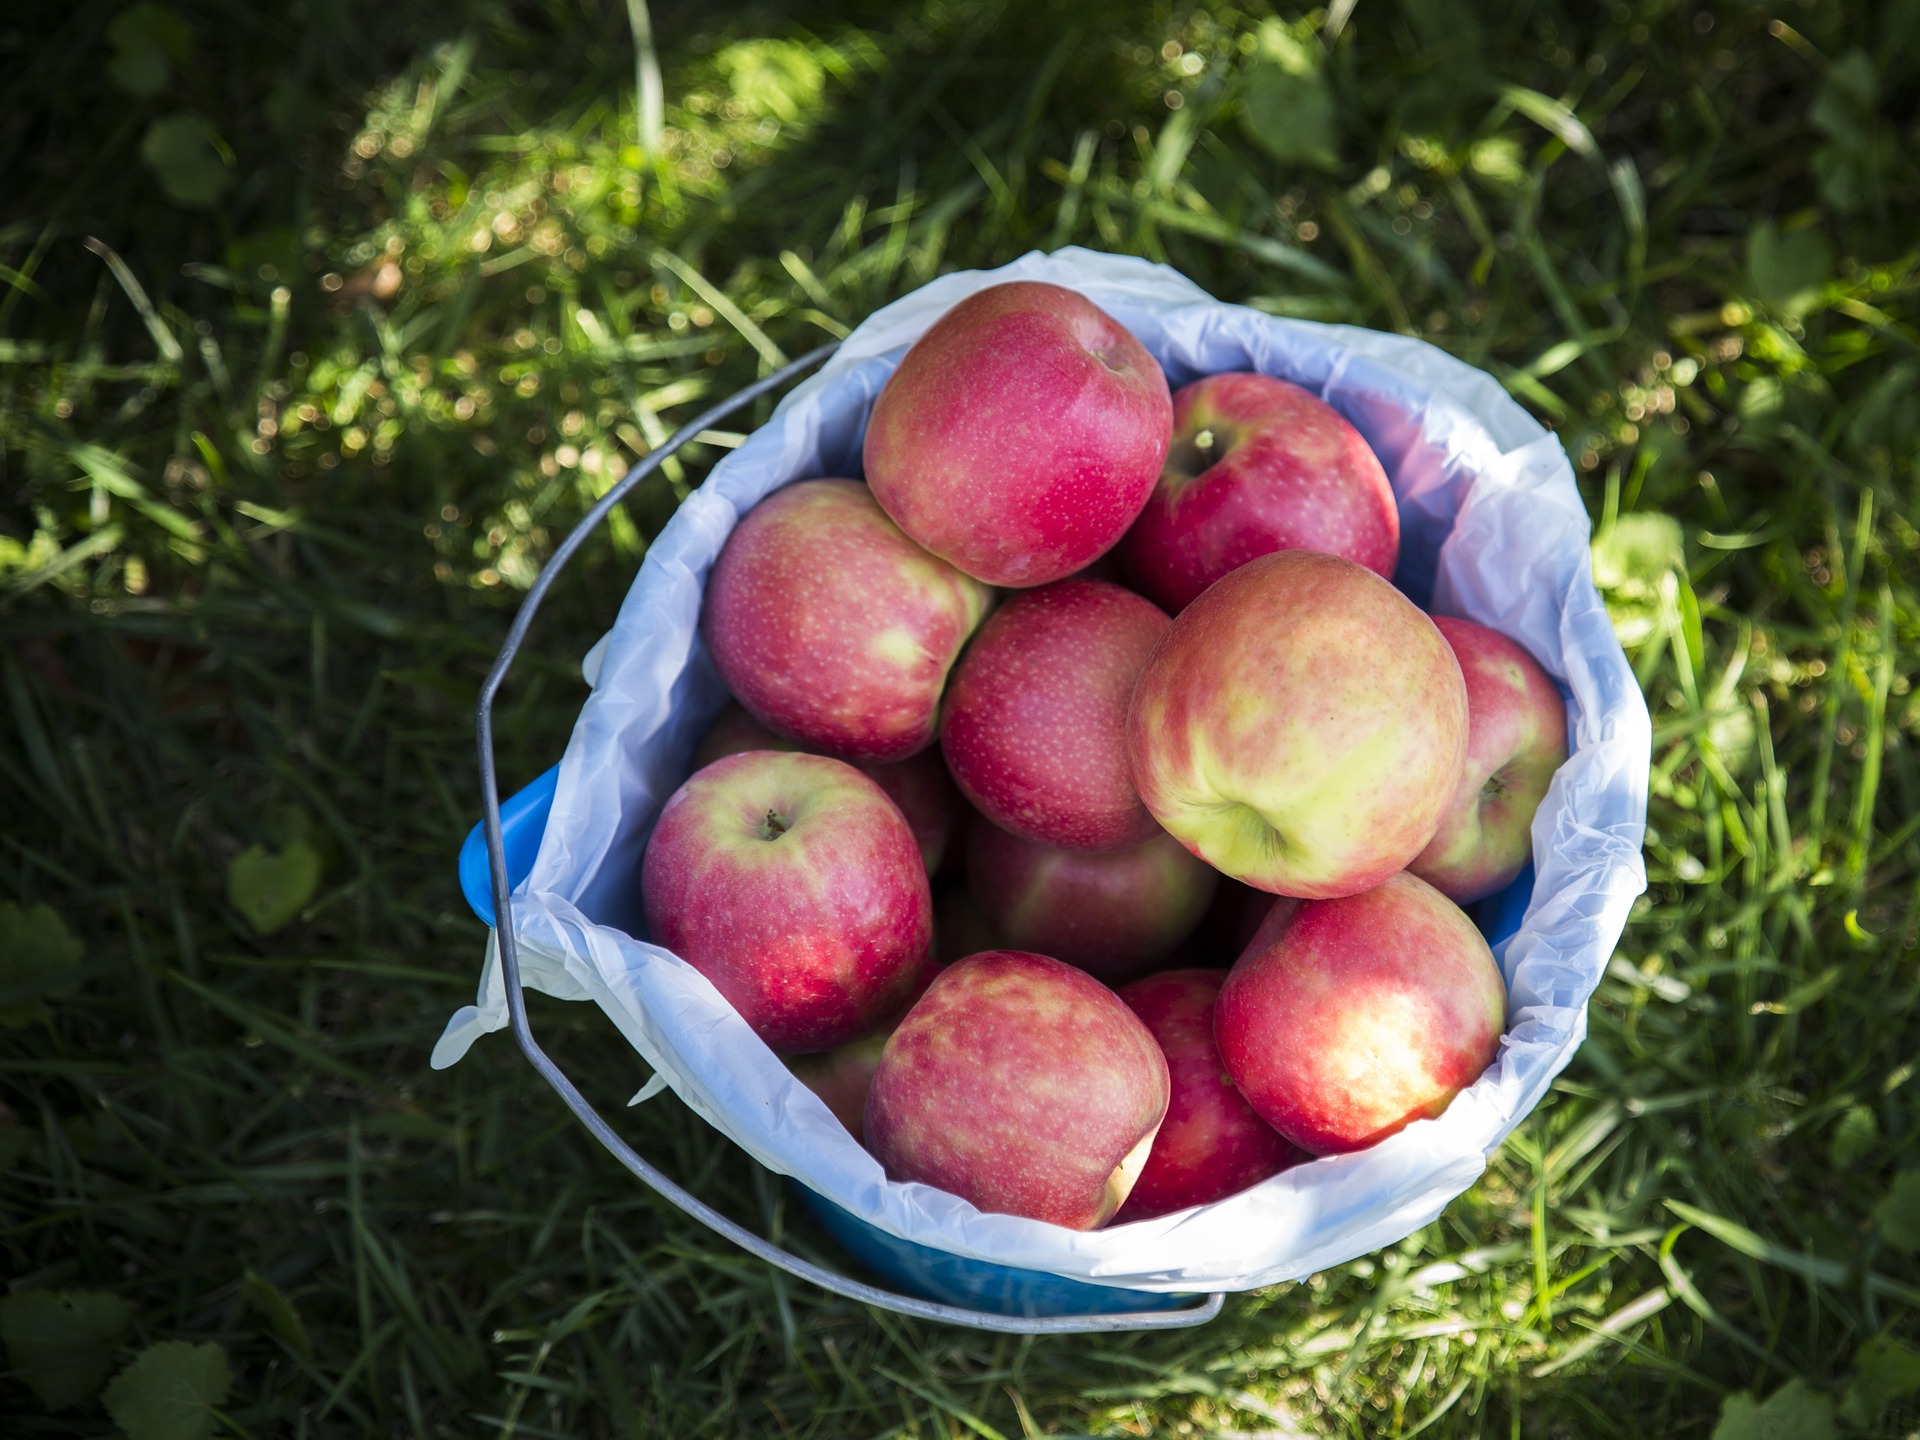 Apple picking fall bucket list for couples